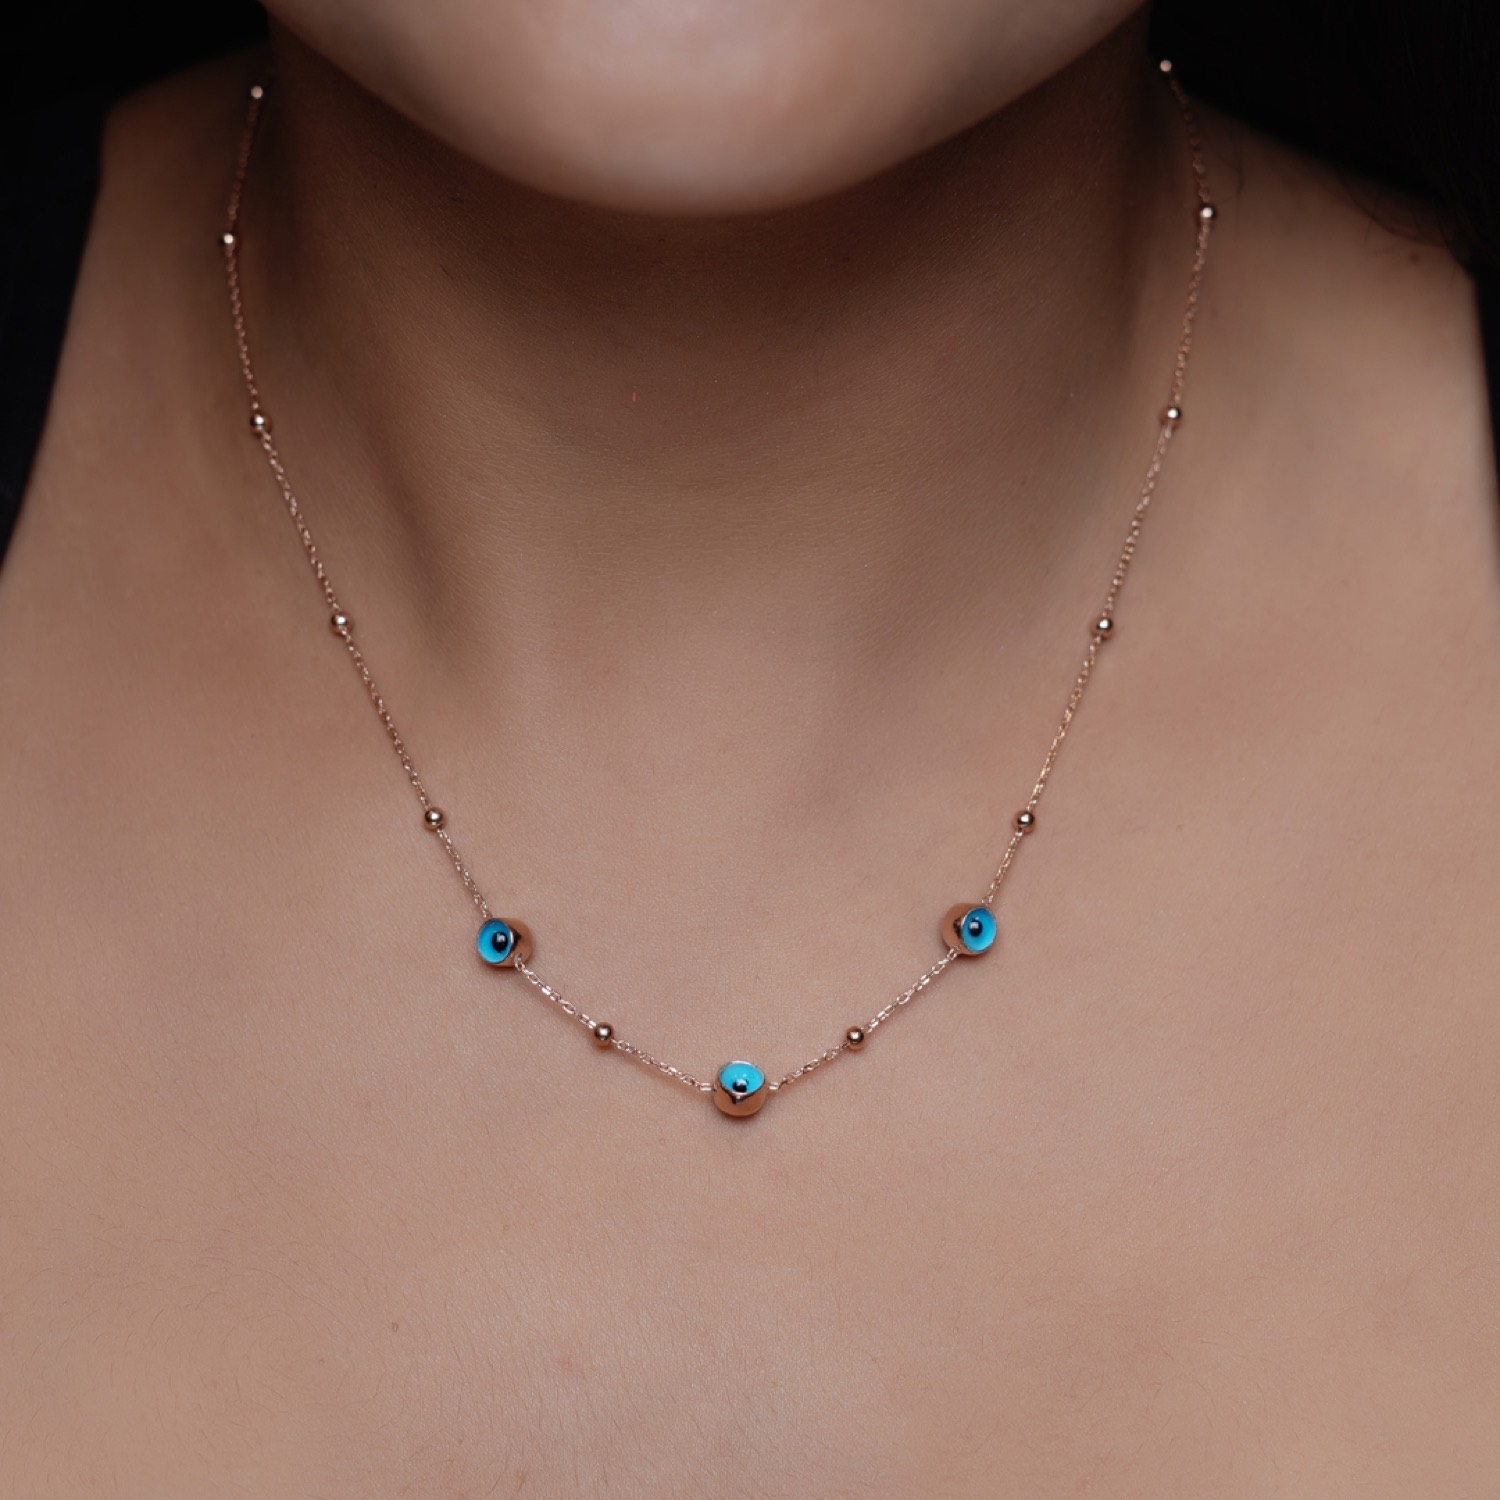 varam_chain_102022_blue_eye_and_tiny_beaded_rose_gold_silver_chain-2